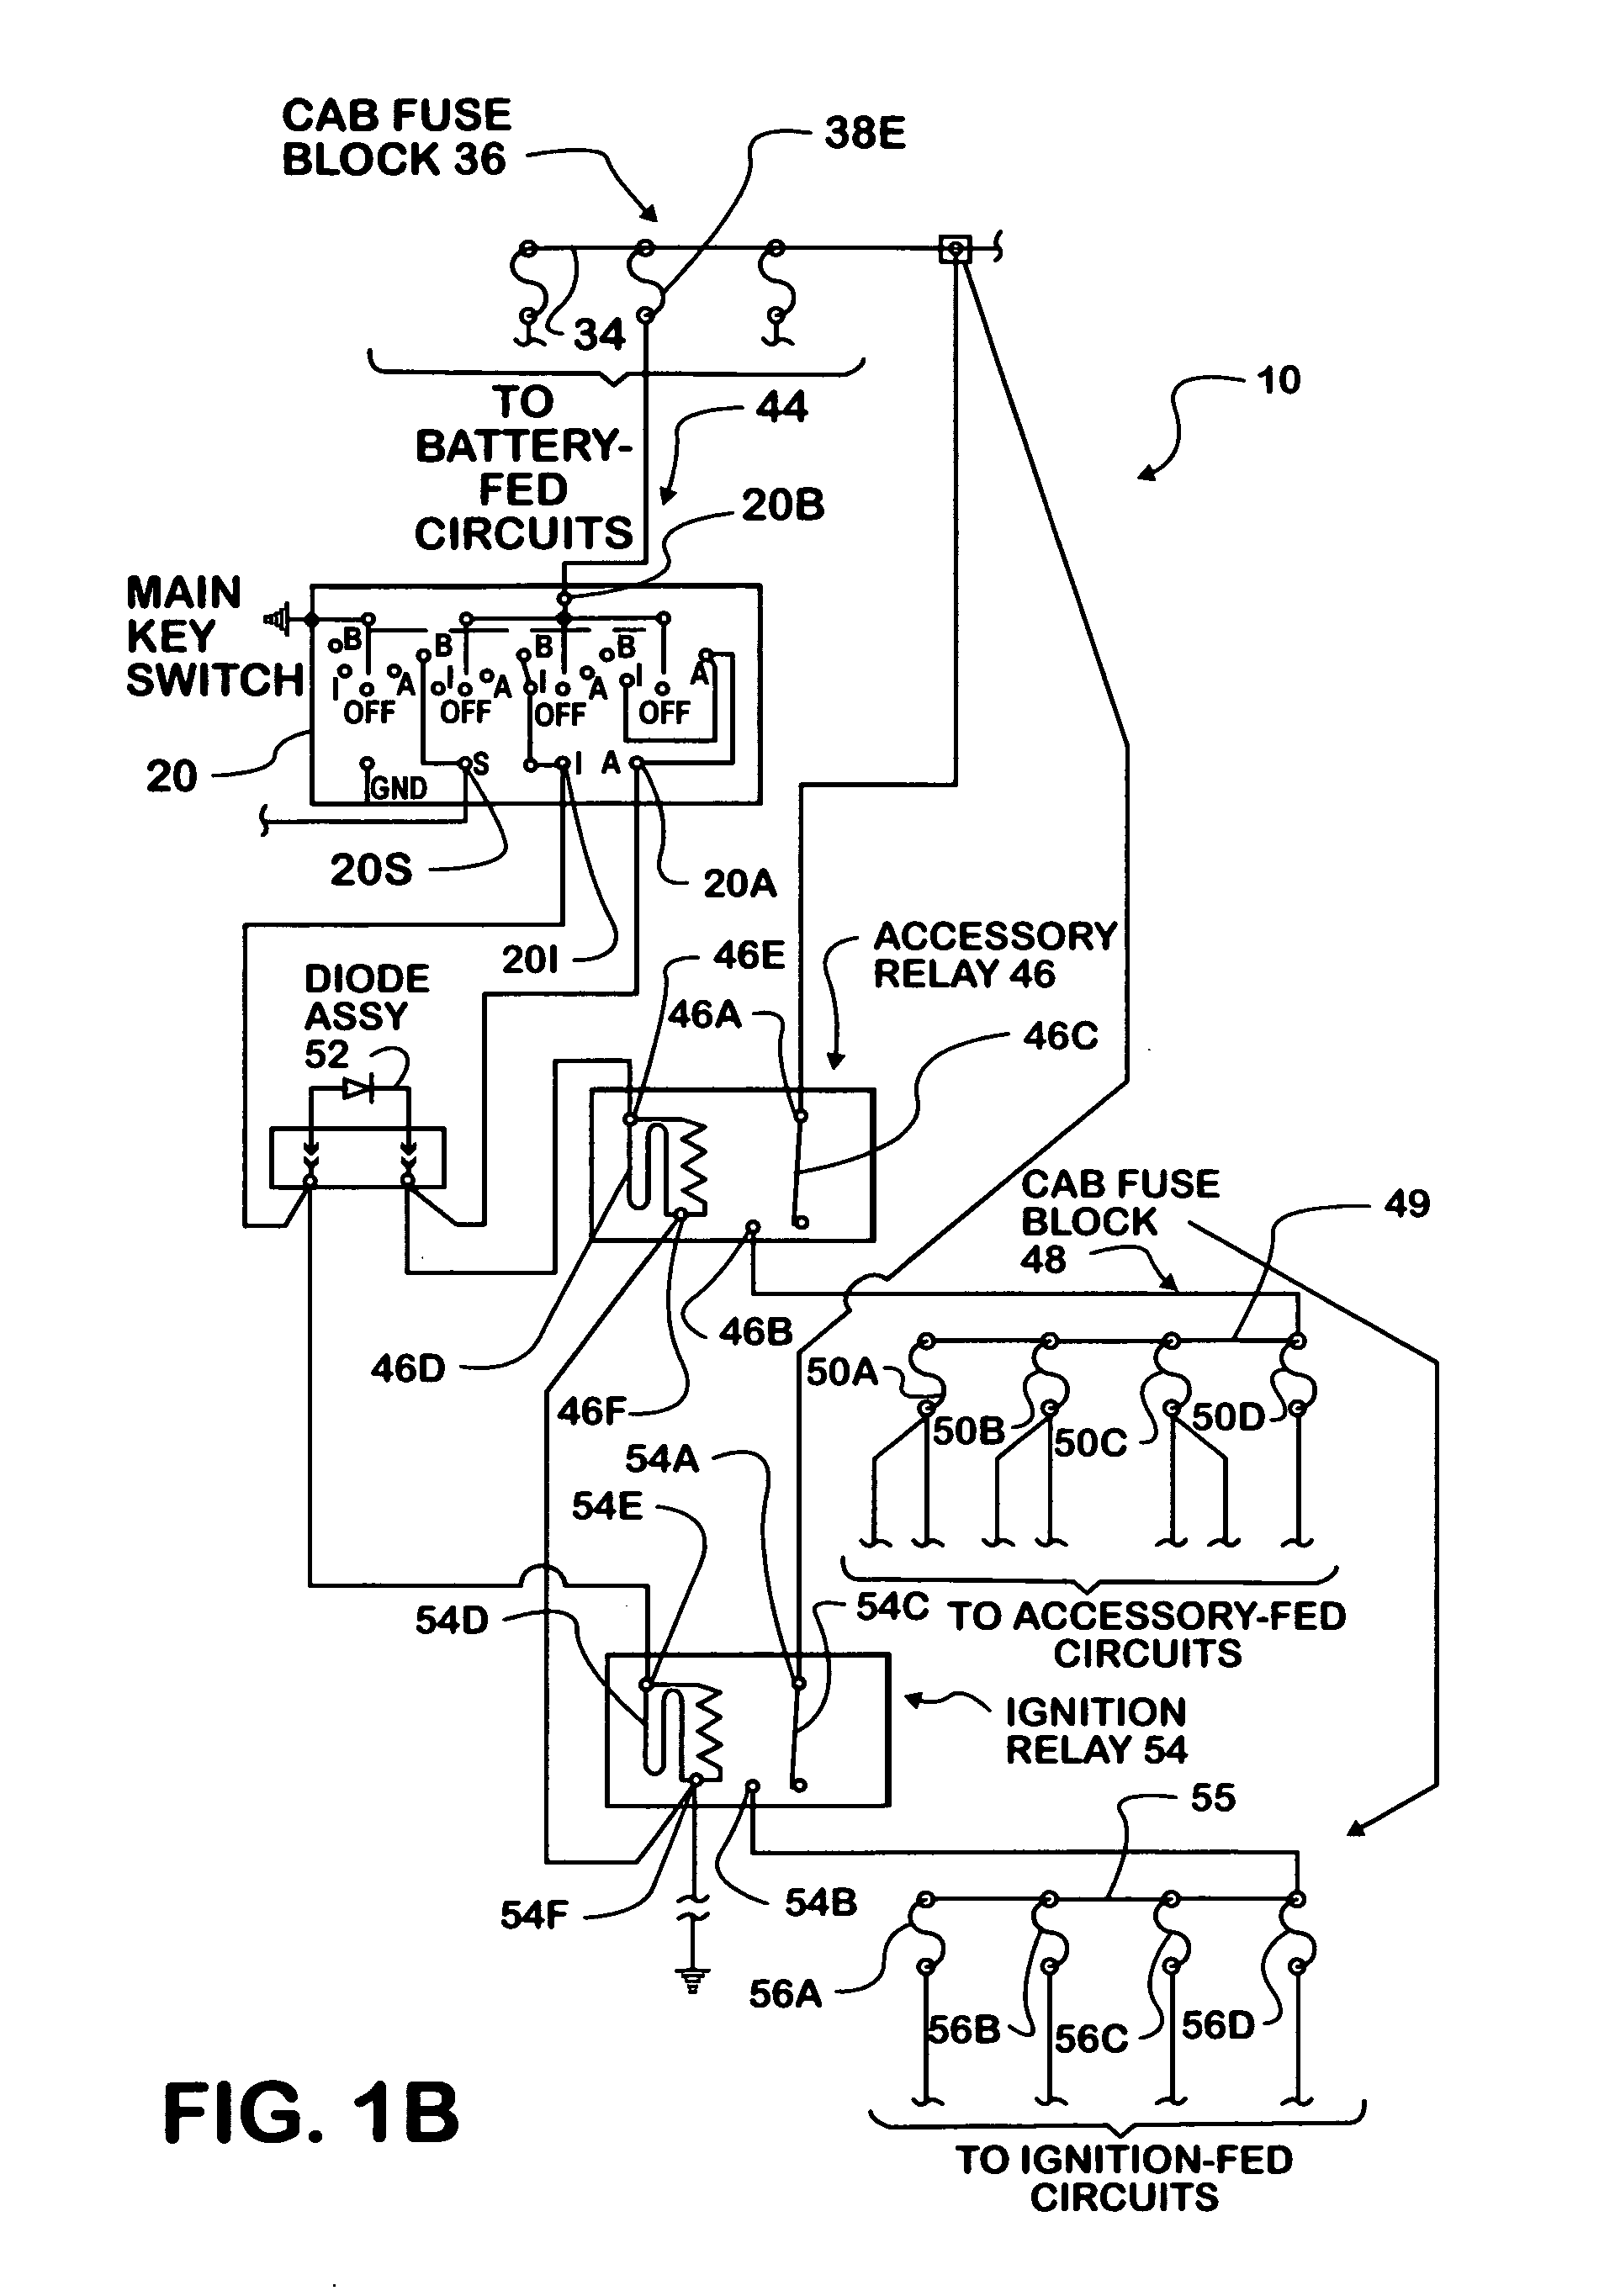 Motor vehicle battery disconnect switch circuits